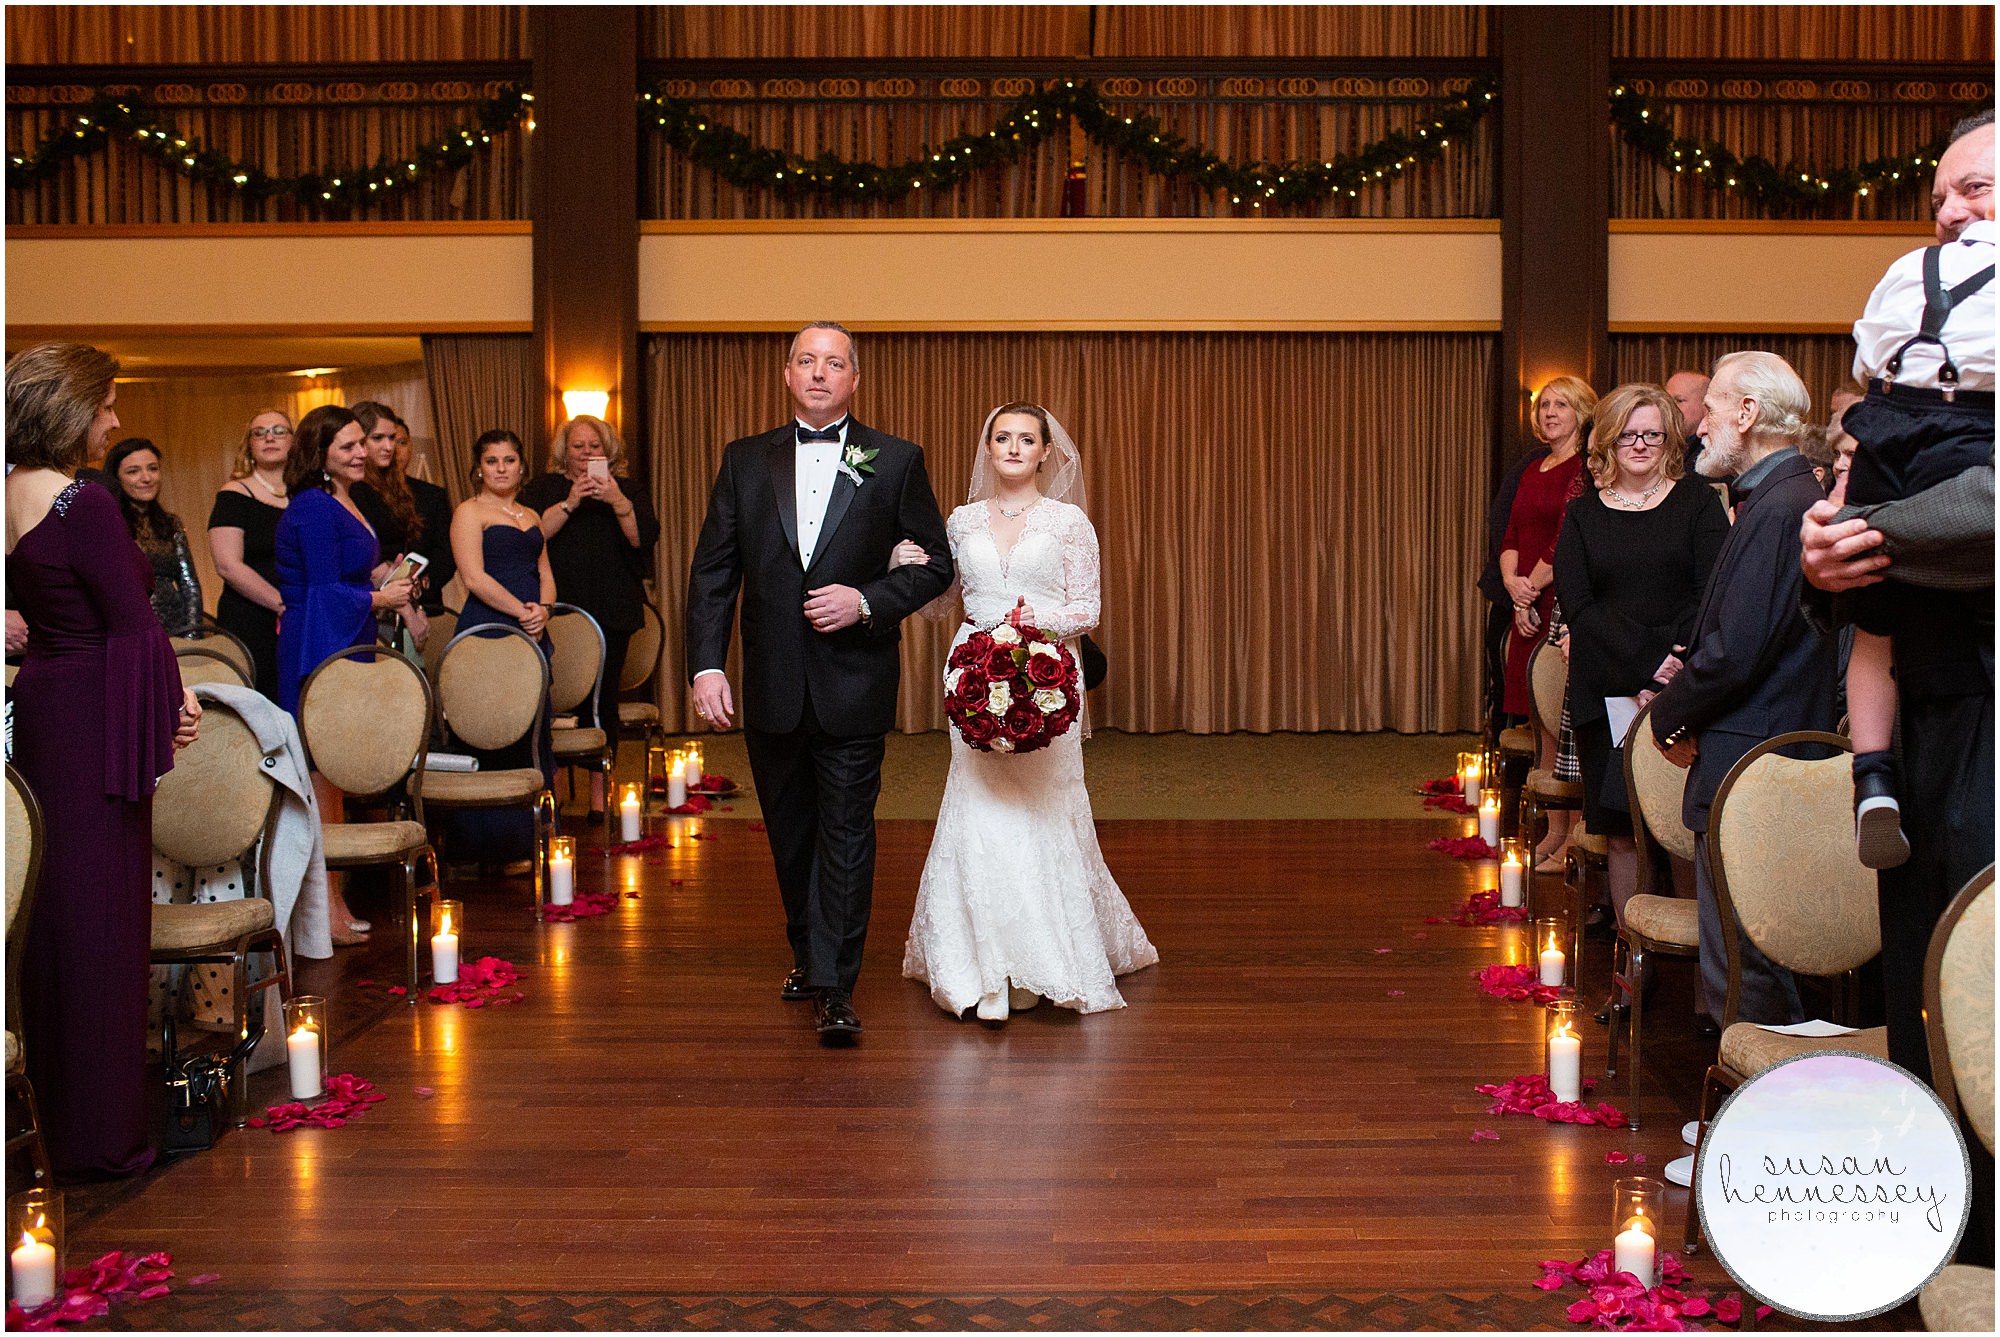 Indoor ceremony at Collingswood Grand Ballroom 